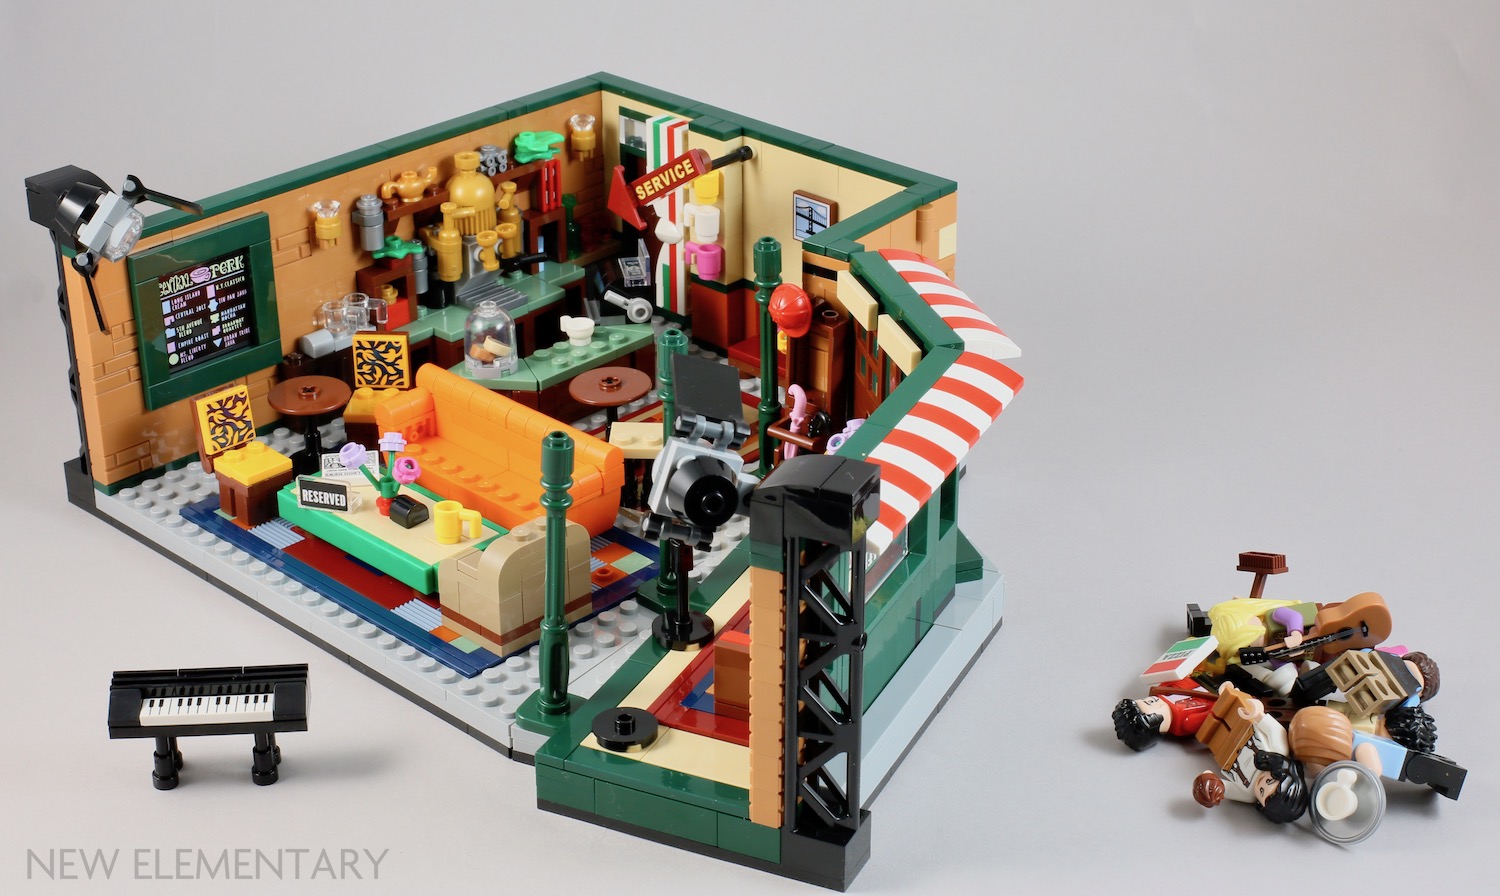 21319 Friends Central Perk LEGO set officially unveiled! - Jay's Brick Blog